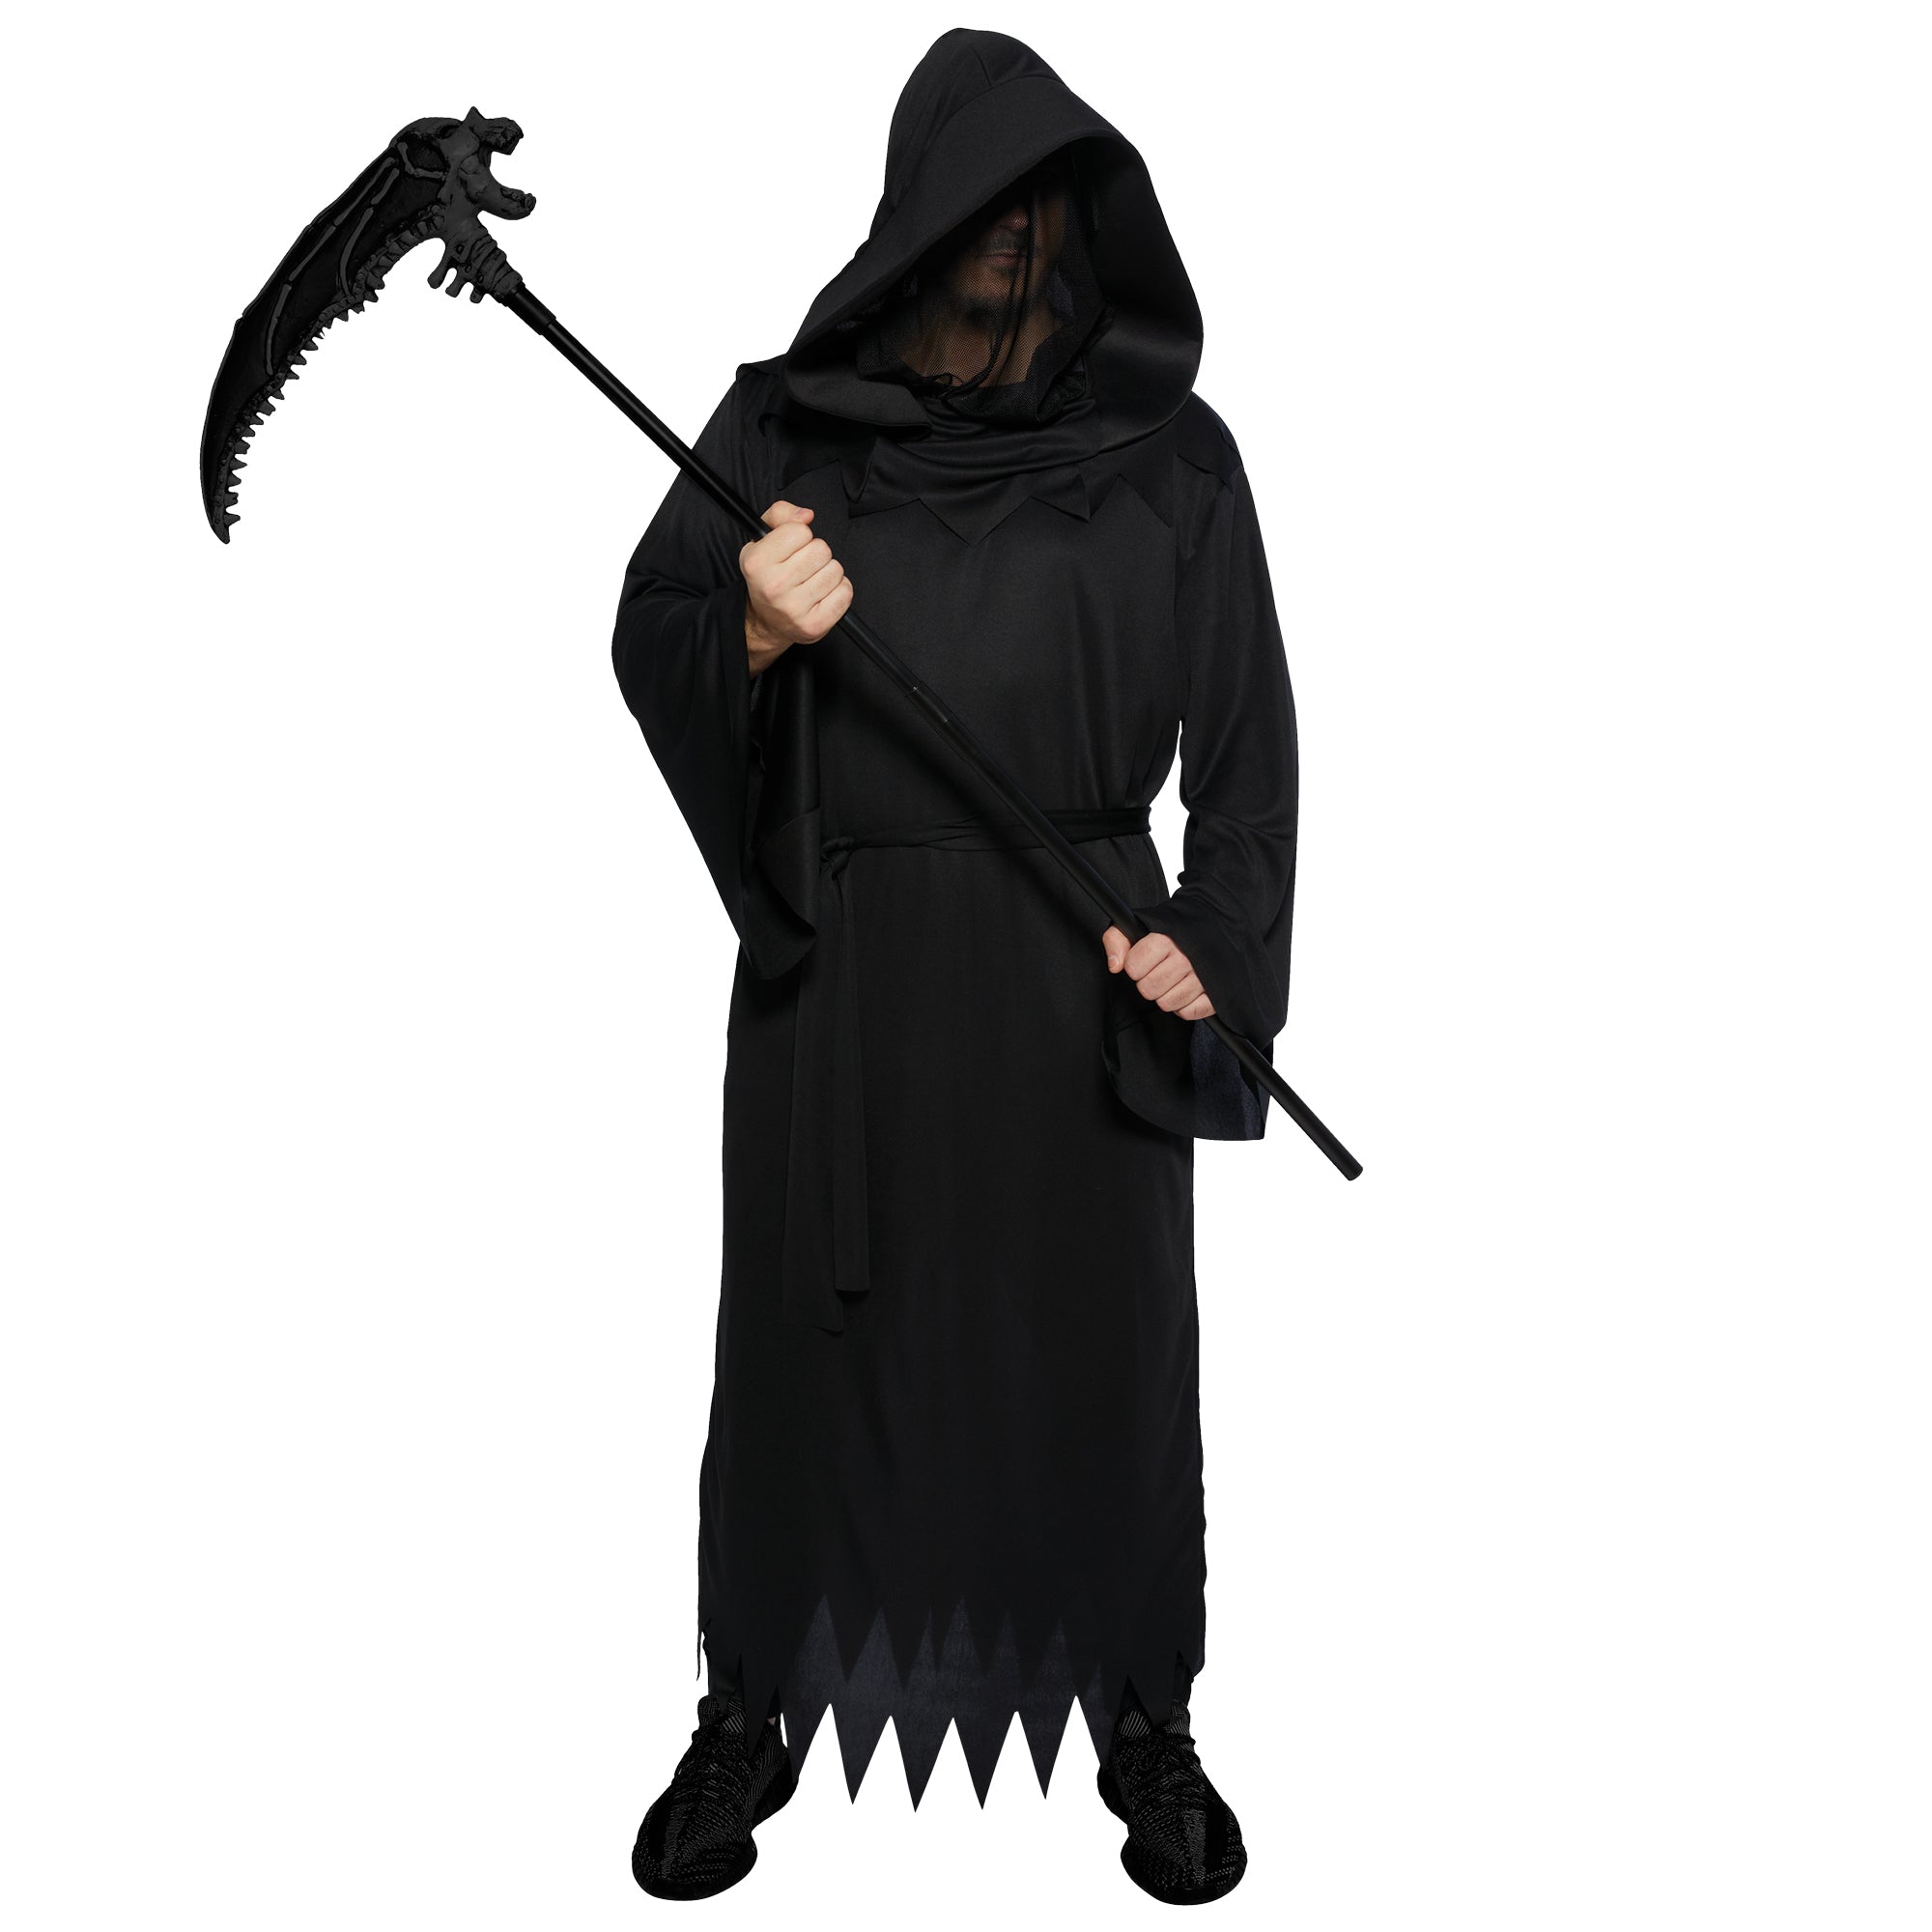 The Reaper Costume for Adults, Black Robe with Mask and Belt